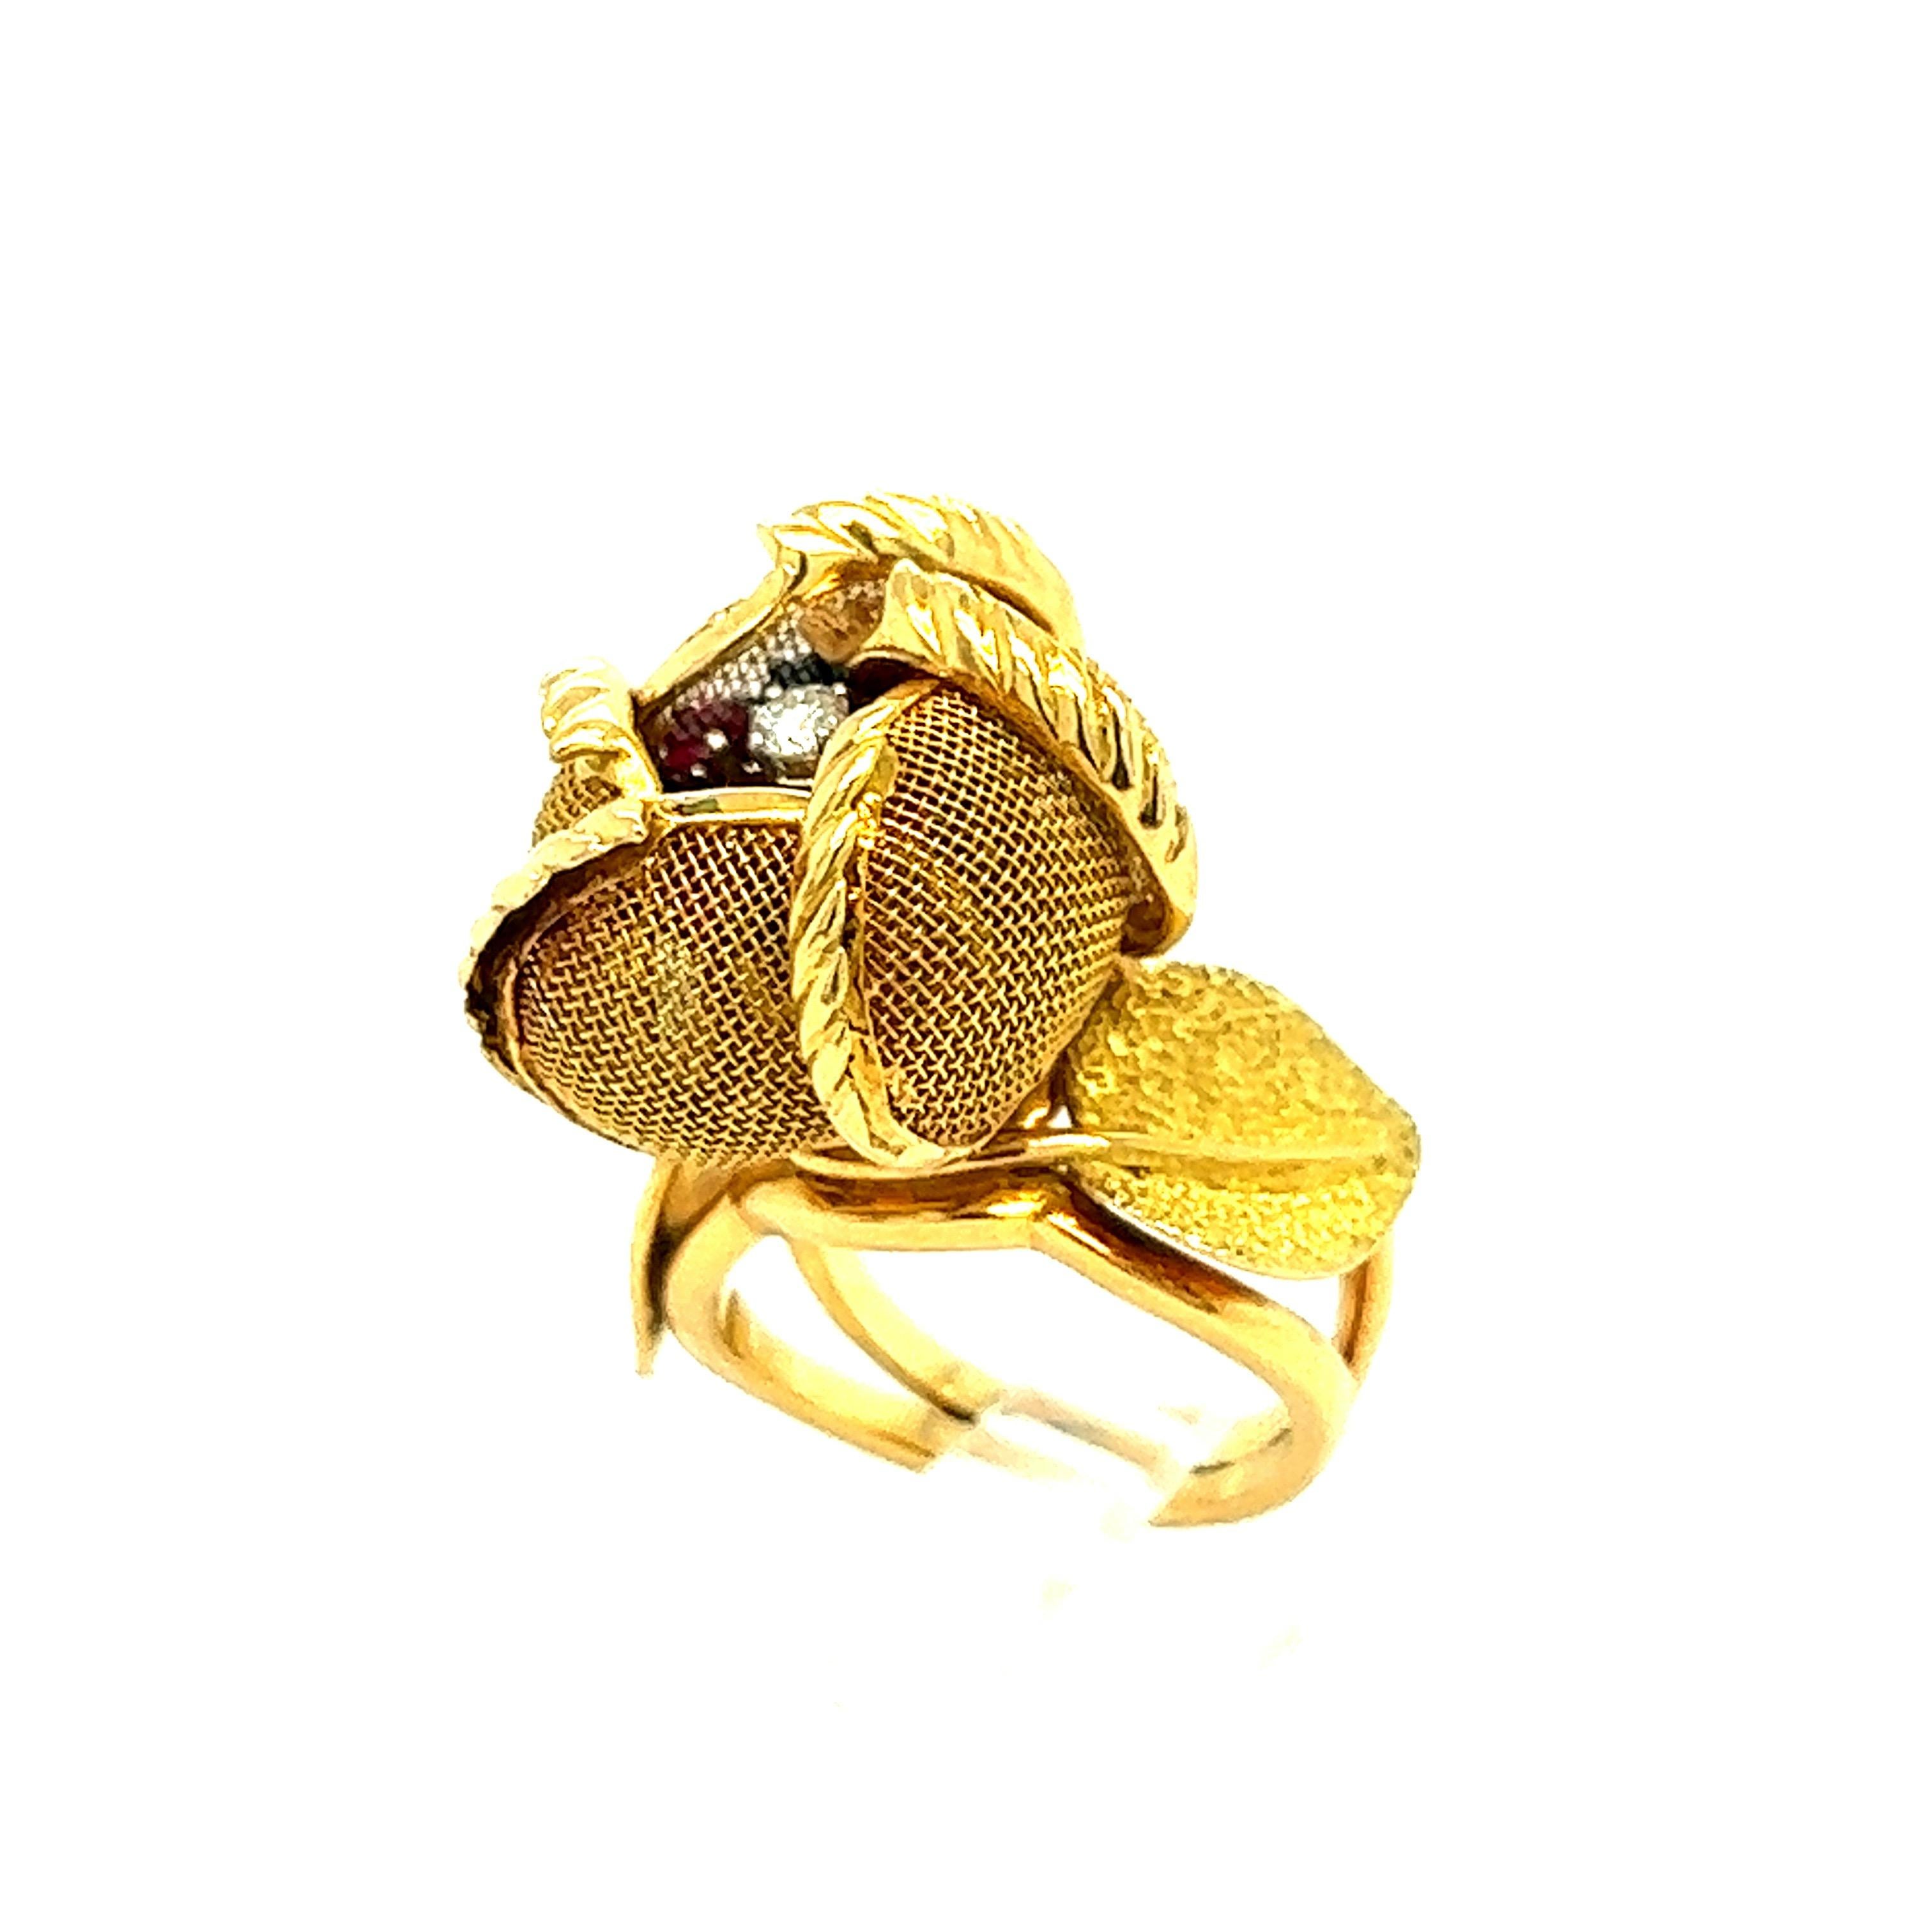 Exquisite continental ruby sapphire and diamond gold rose flower ring, circa 1940s 

Round-cut diamond of approximately 0.06 carat, 18 karat yellow gold, with movable opening and closing petals; marked with Continental gold hallmarks on the outside